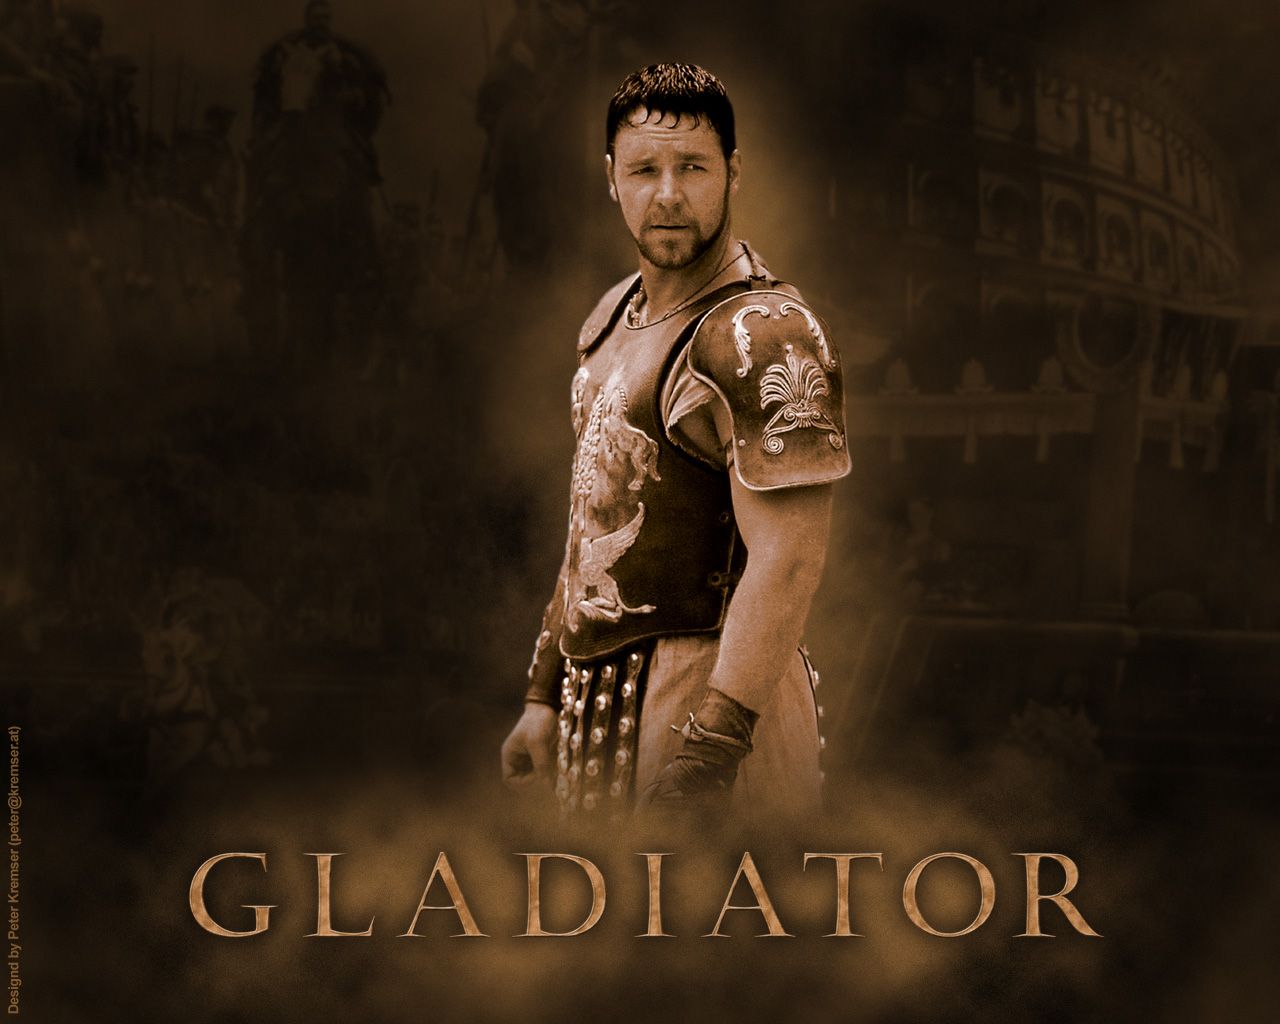 Wallpapers Gladiator Movies Image #80355 Download